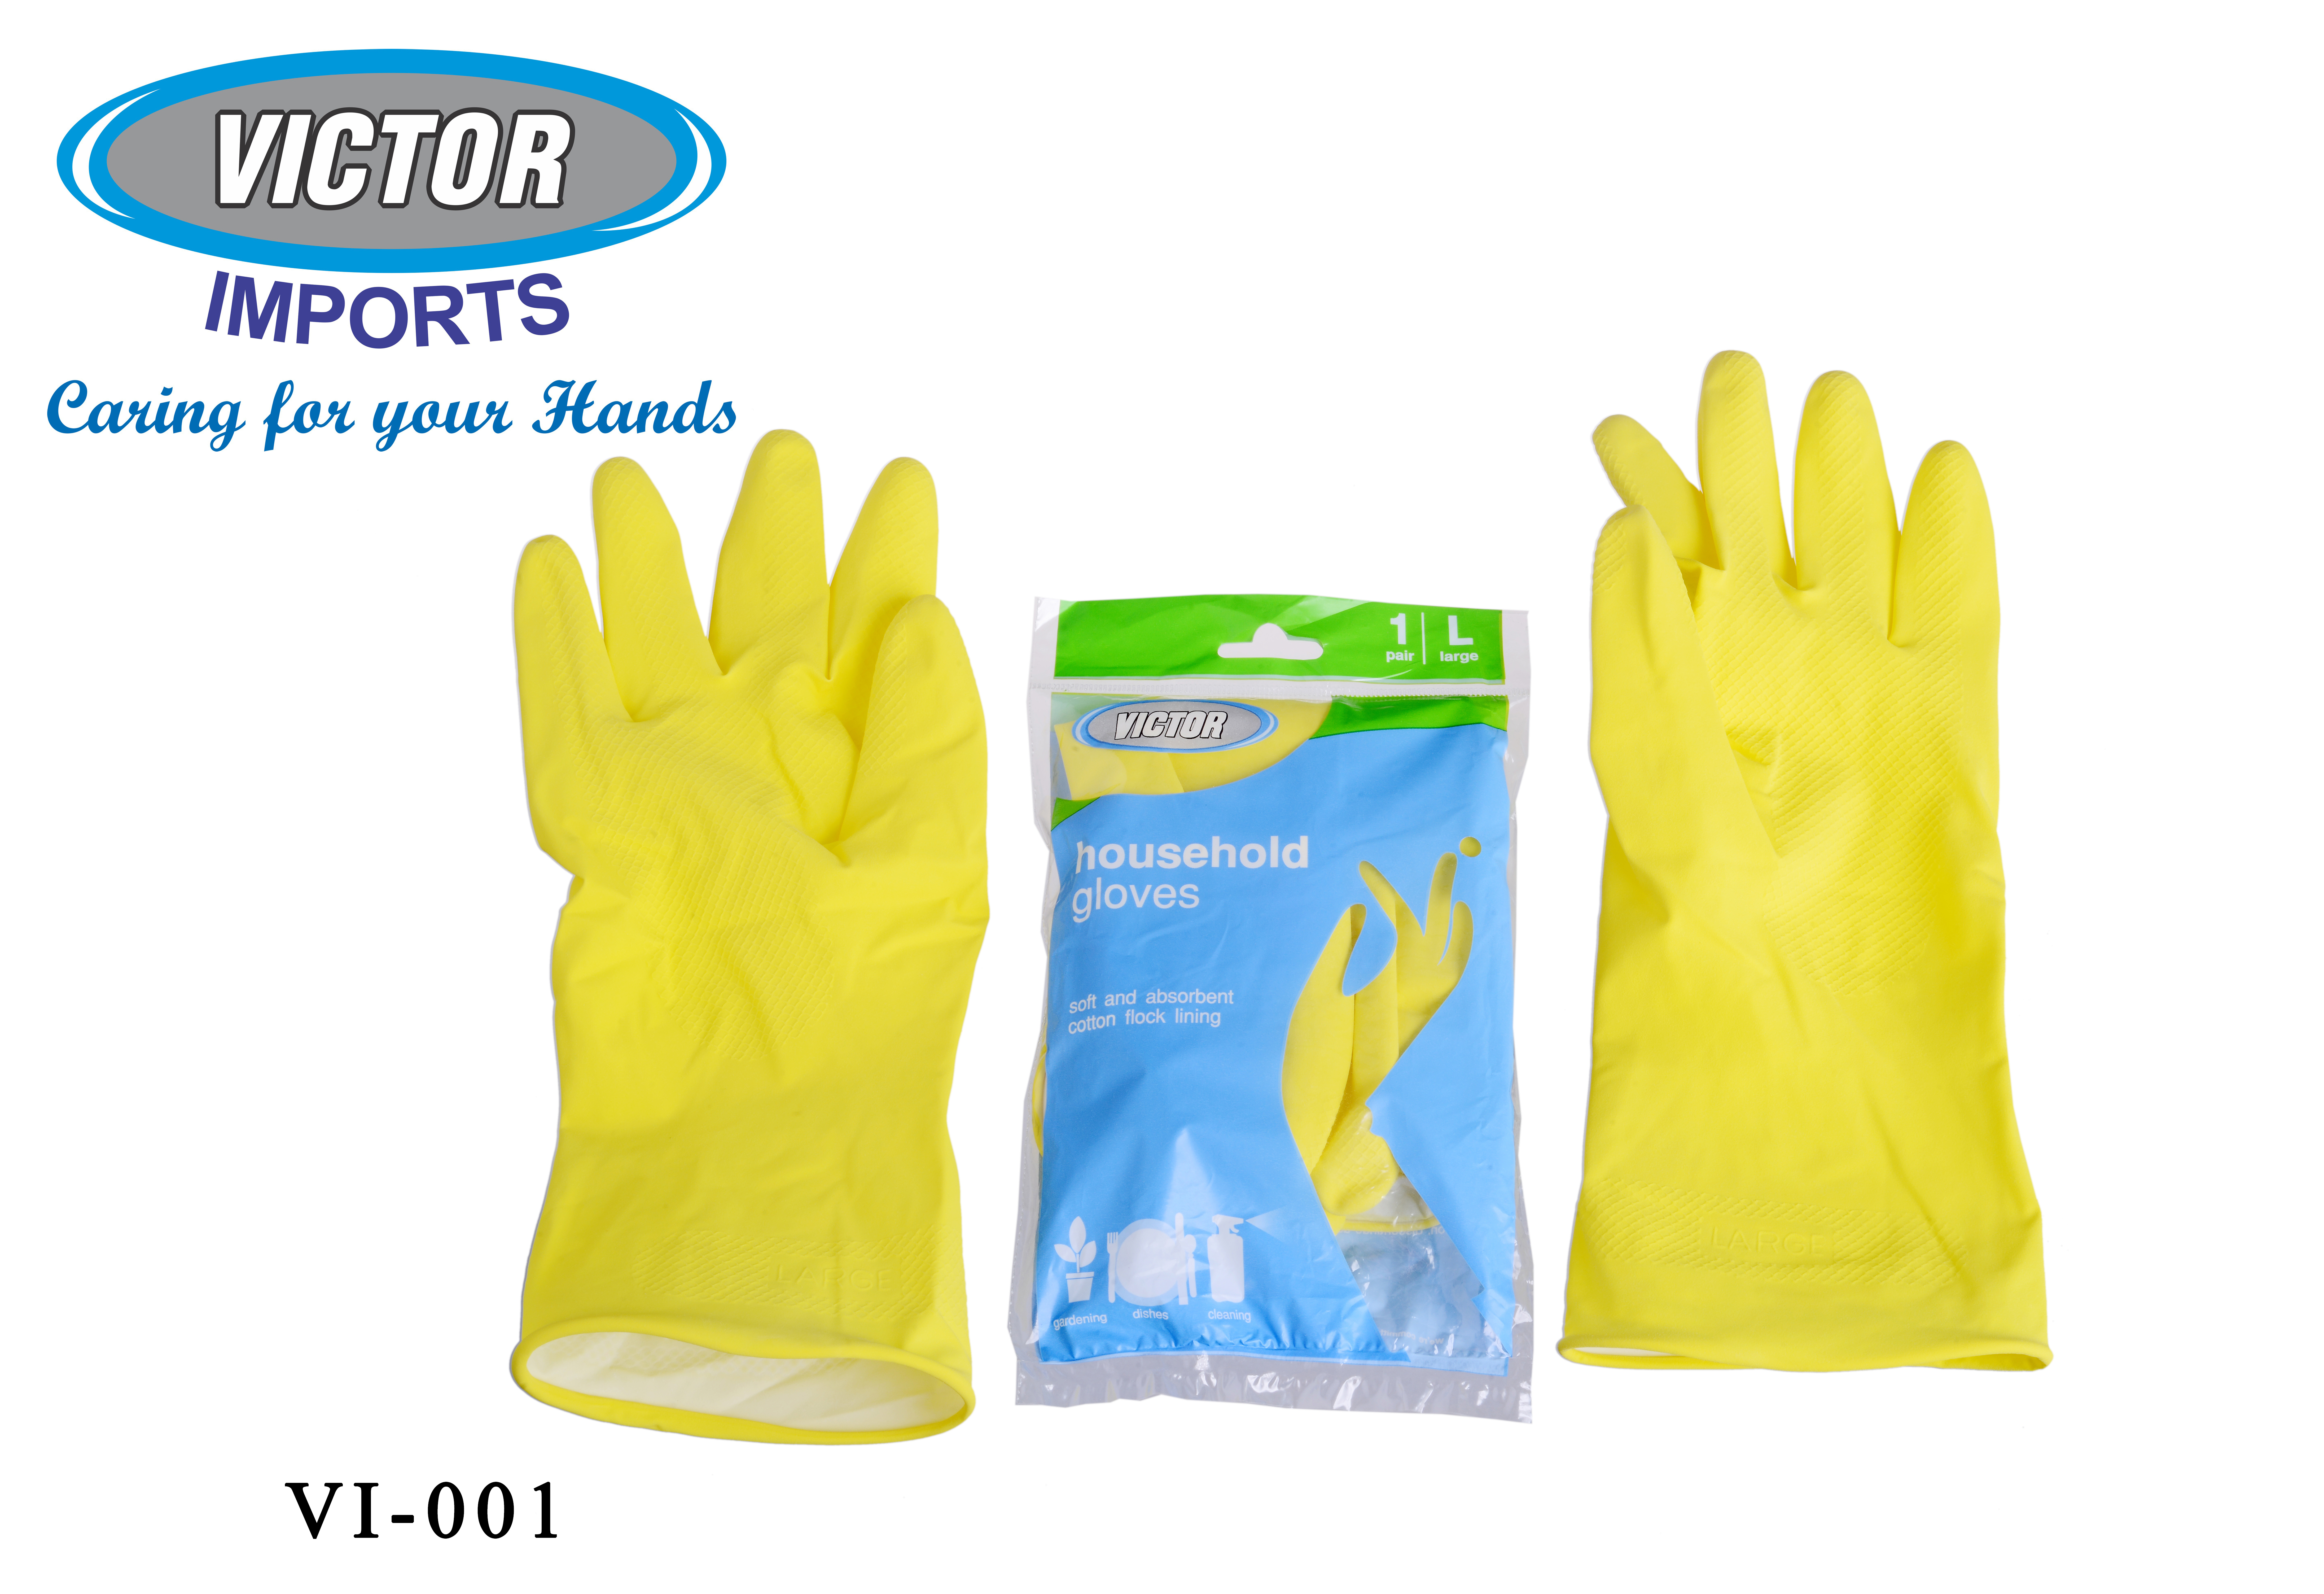 Flock Lined Rubber Hand Gloves